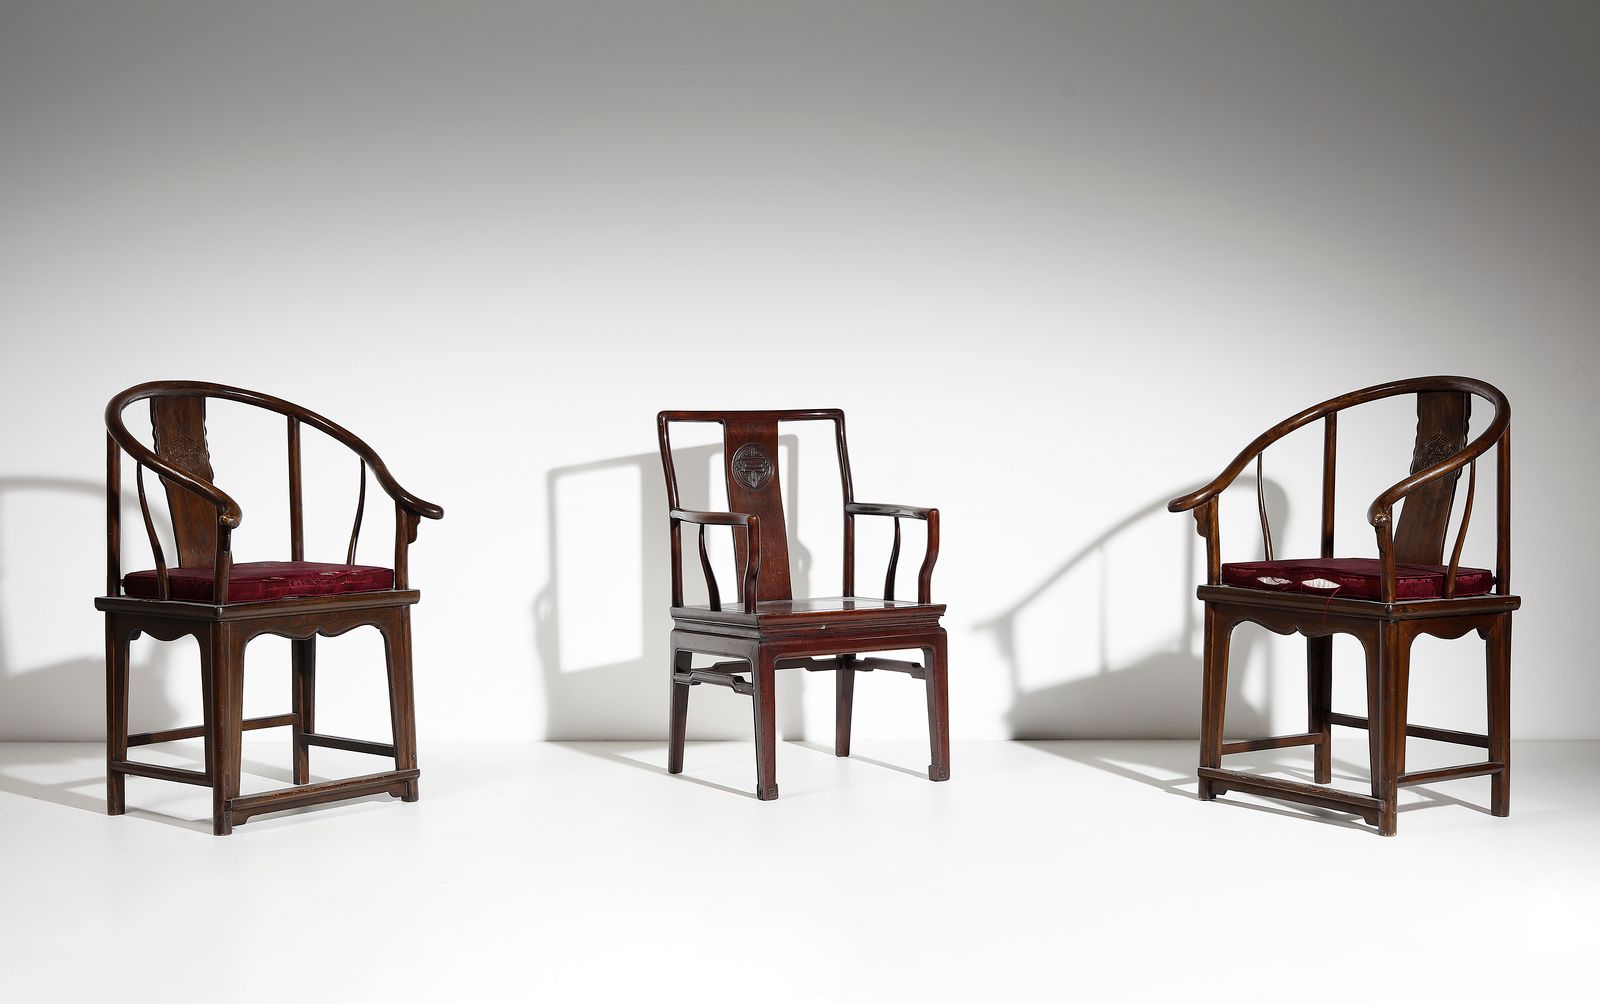 Chinese Art A group of three wooden armchairs Chinese Art. A group of three wood&hellip;